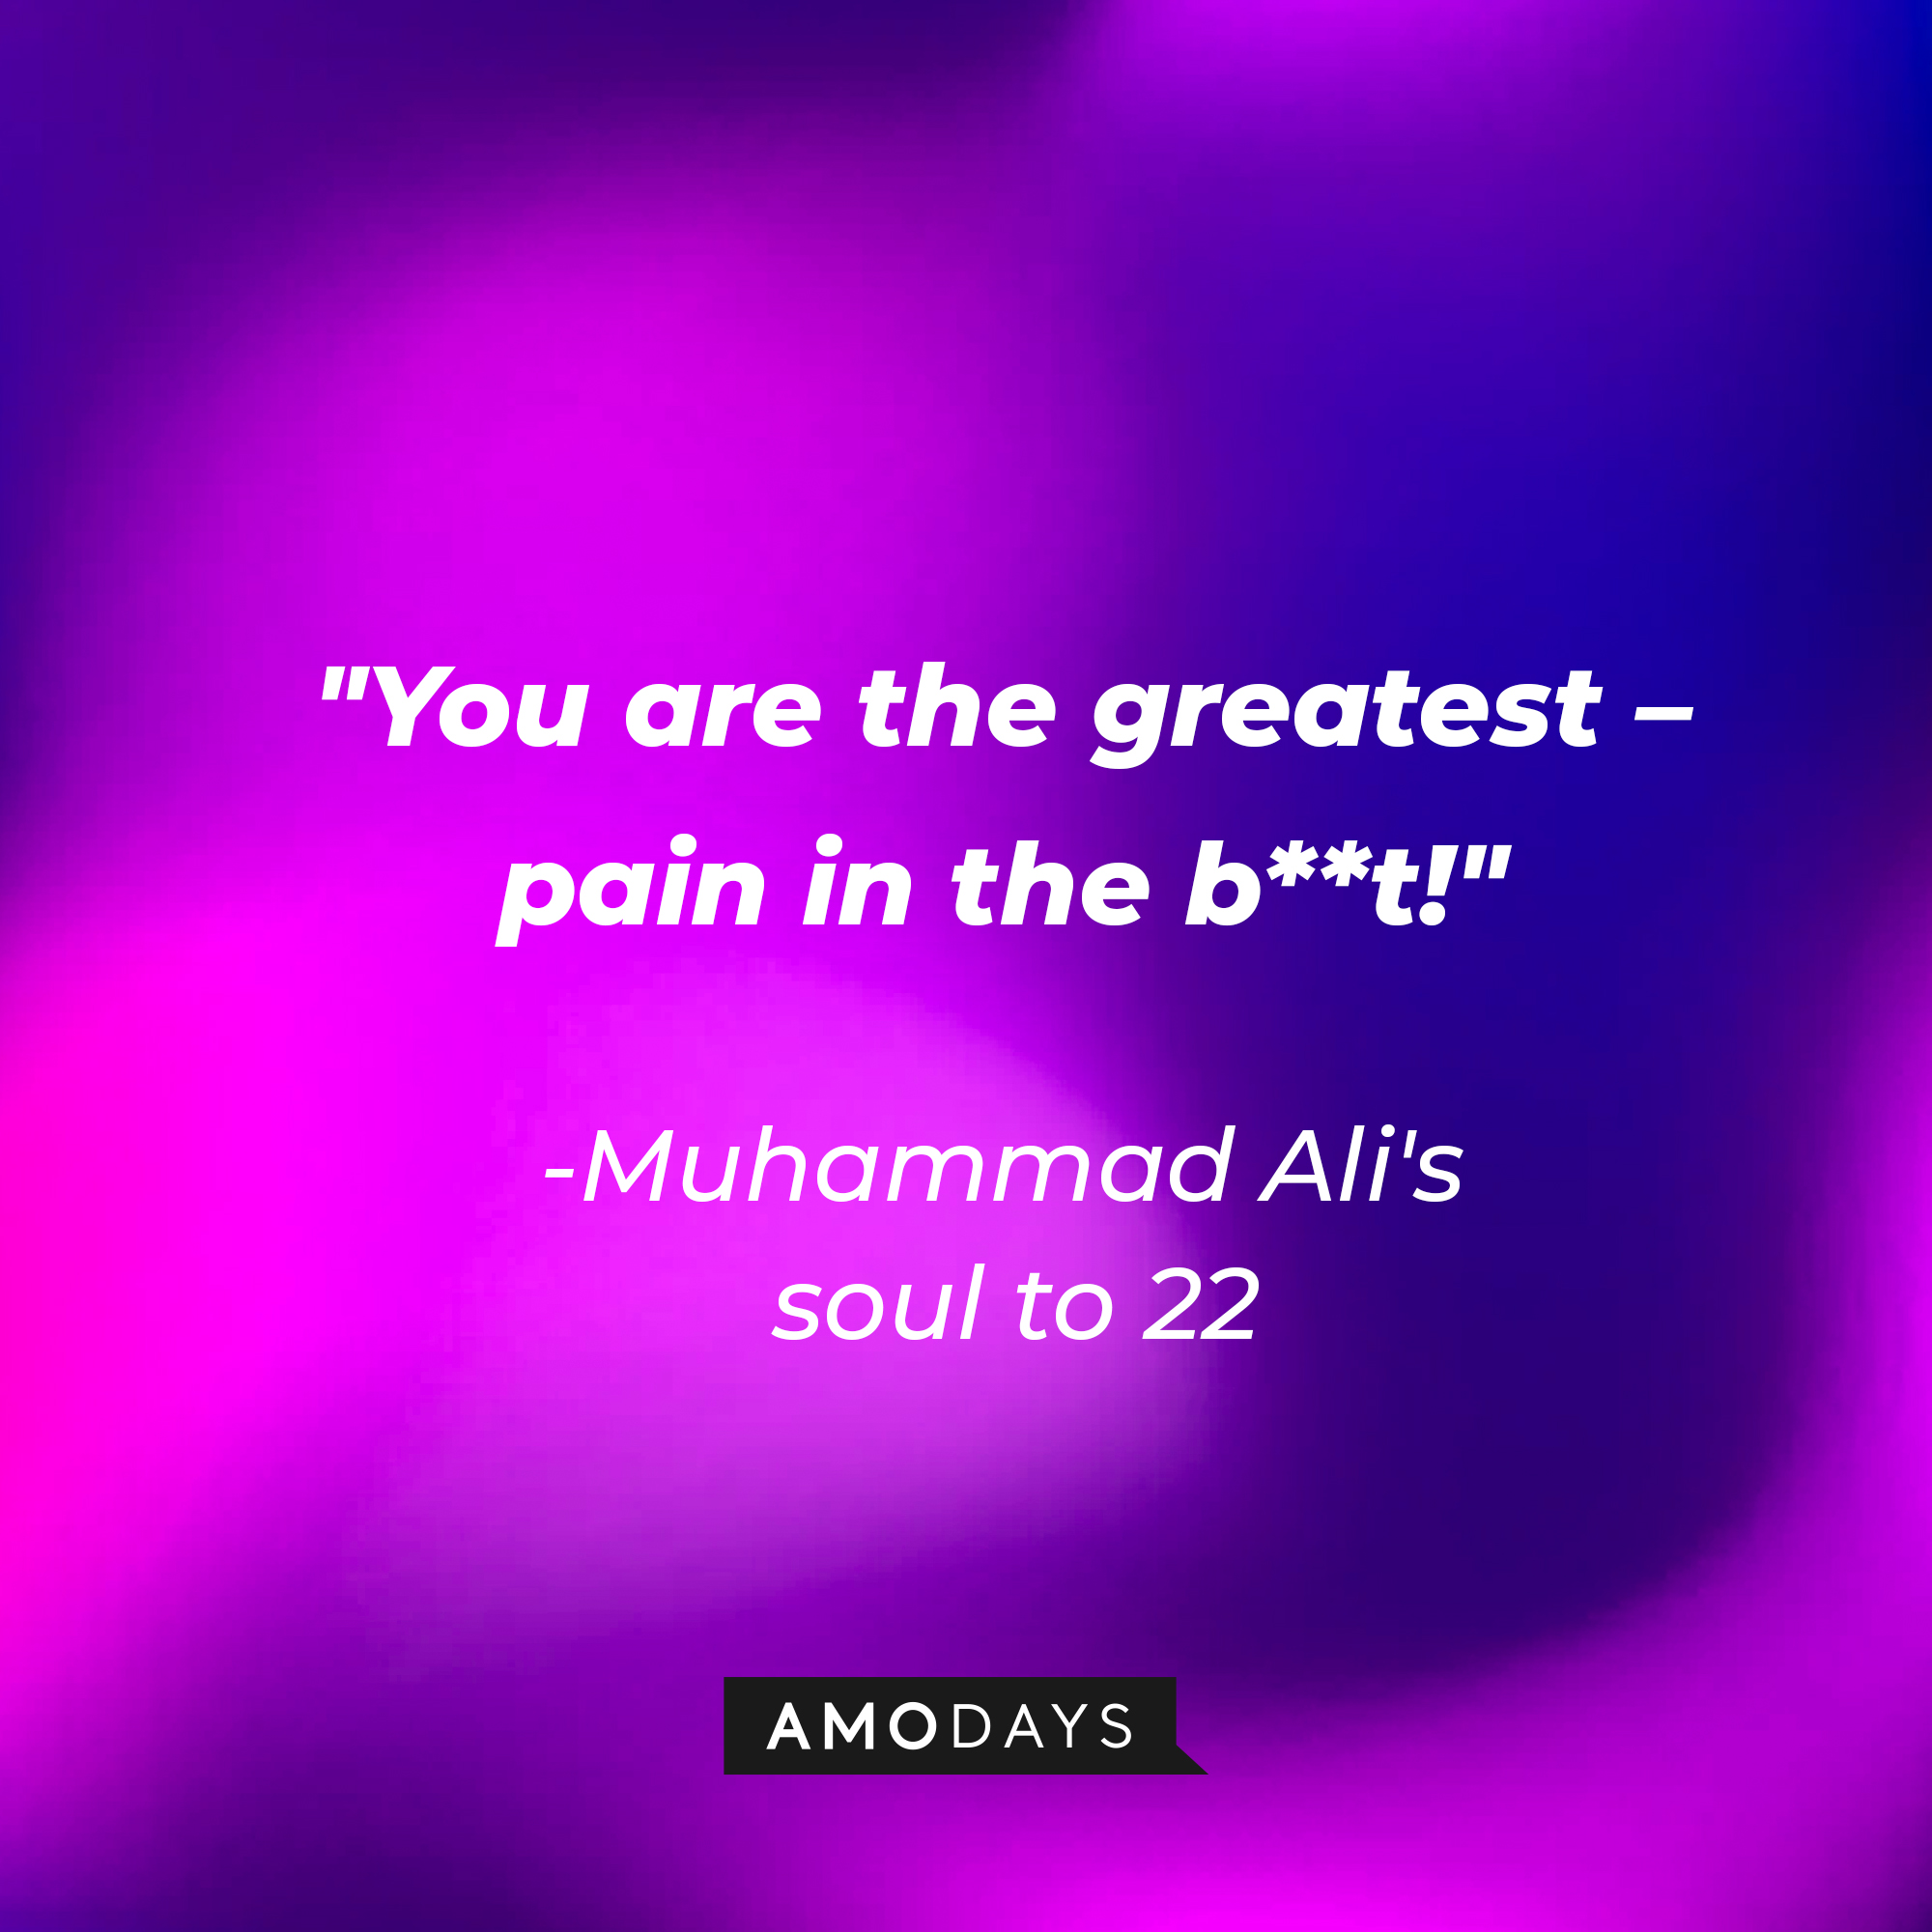 A quote of Muhammad Ali's soul to 22: "You are the greatest – pain in the b**t!" | Source: youtube.com/pixar